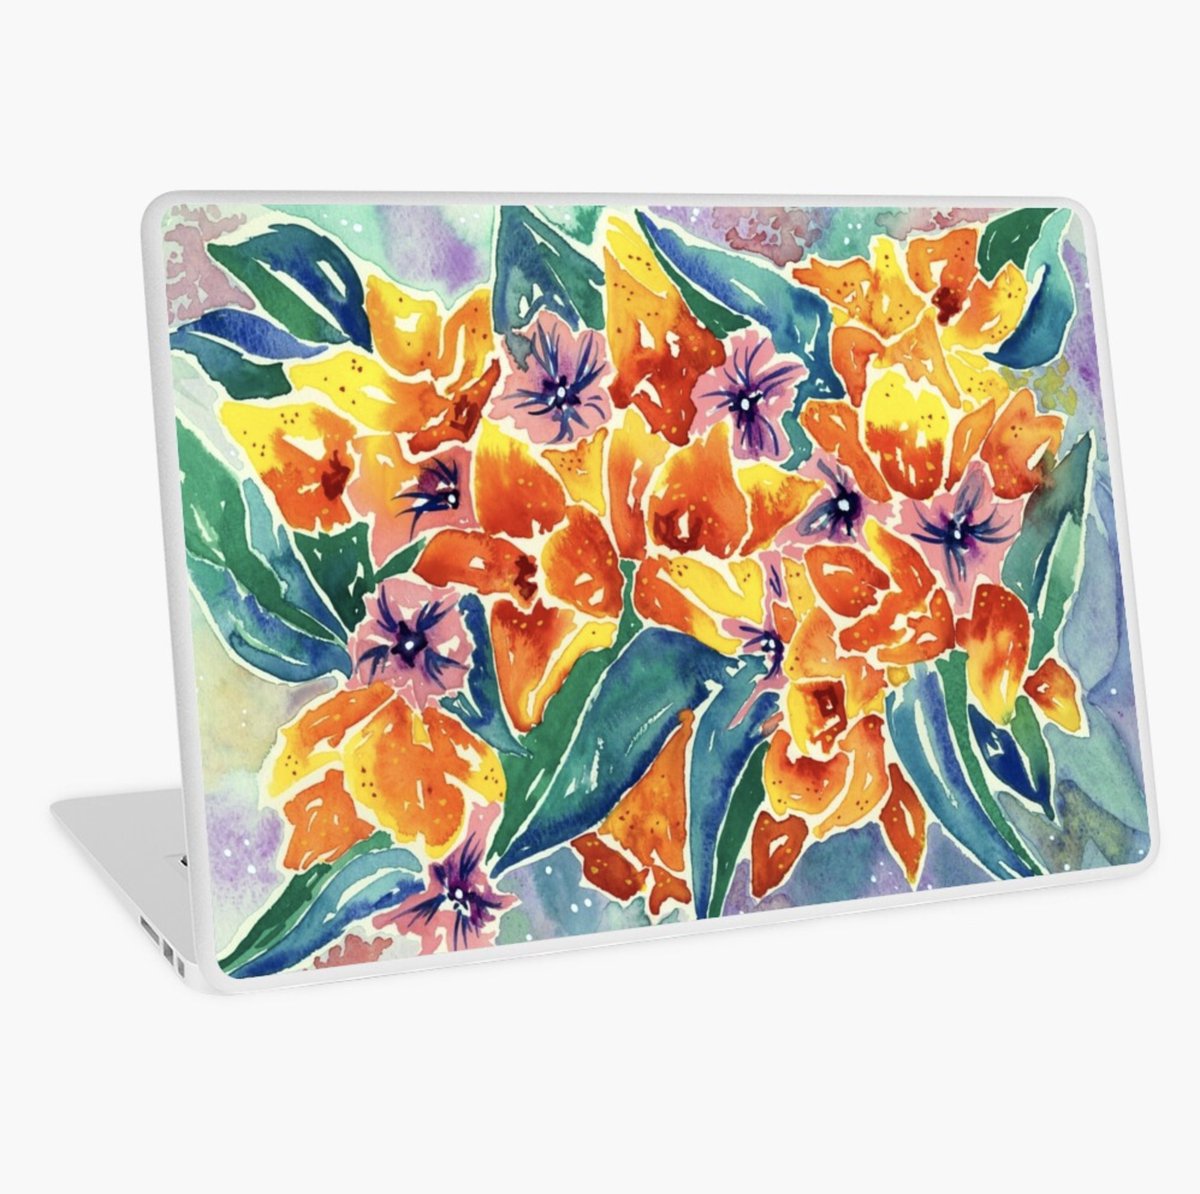 Bright floral designs in my #Redbubble shop tinyurl.com/mry3zbwa Say it with flowers #GiftIdeas #Floral #SupportSmallBusinesses #SupportIndependentDesigners #IndependentArtists #CommissionsOpen #Gouache #MouseMat #LaptopSkin #Laptop #Computers #ComputerGoods #Office #DeskSetUp